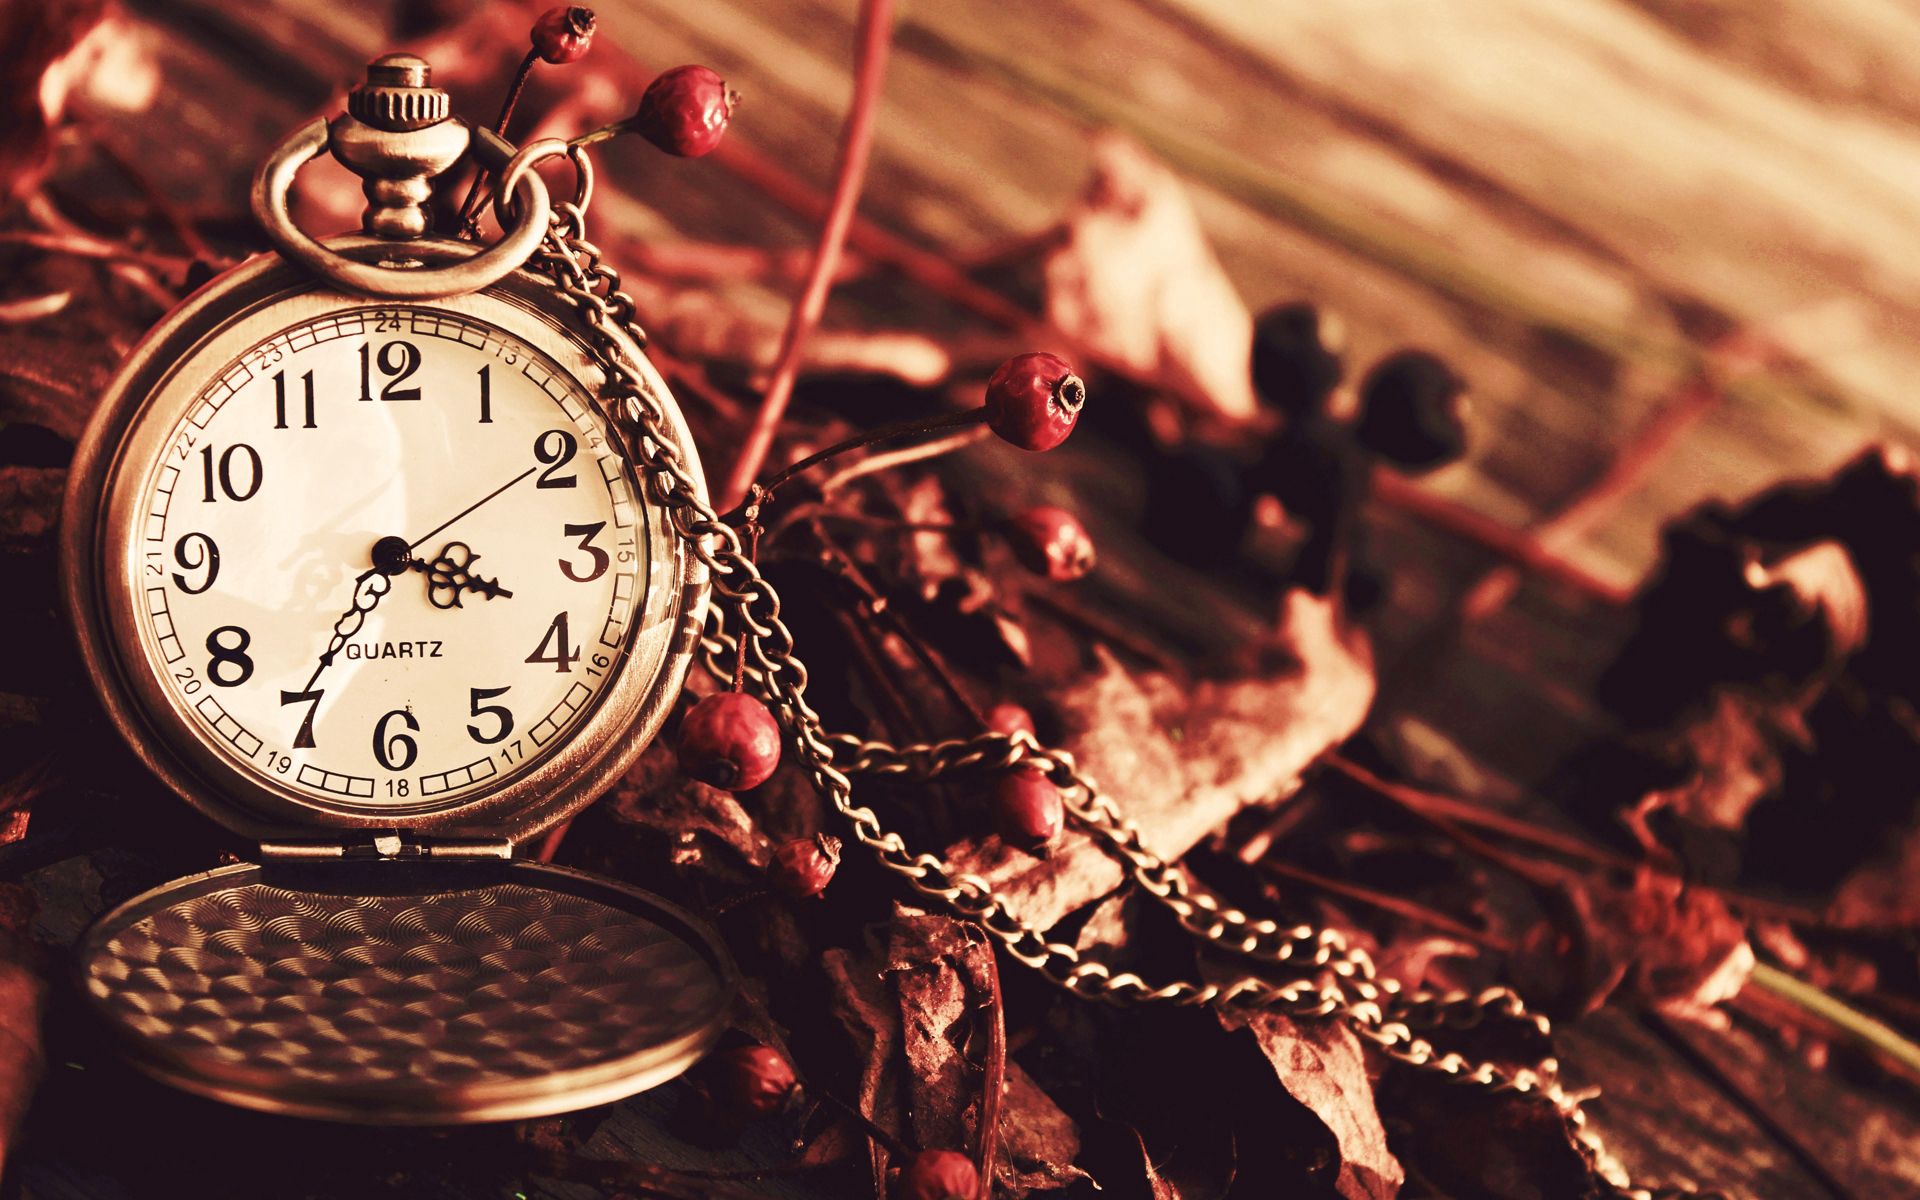 58951 Screensavers and Wallpapers Chain for phone. Download autumn, clock, berries, miscellanea, miscellaneous, dry, clock face, dial, pocket, chain pictures for free